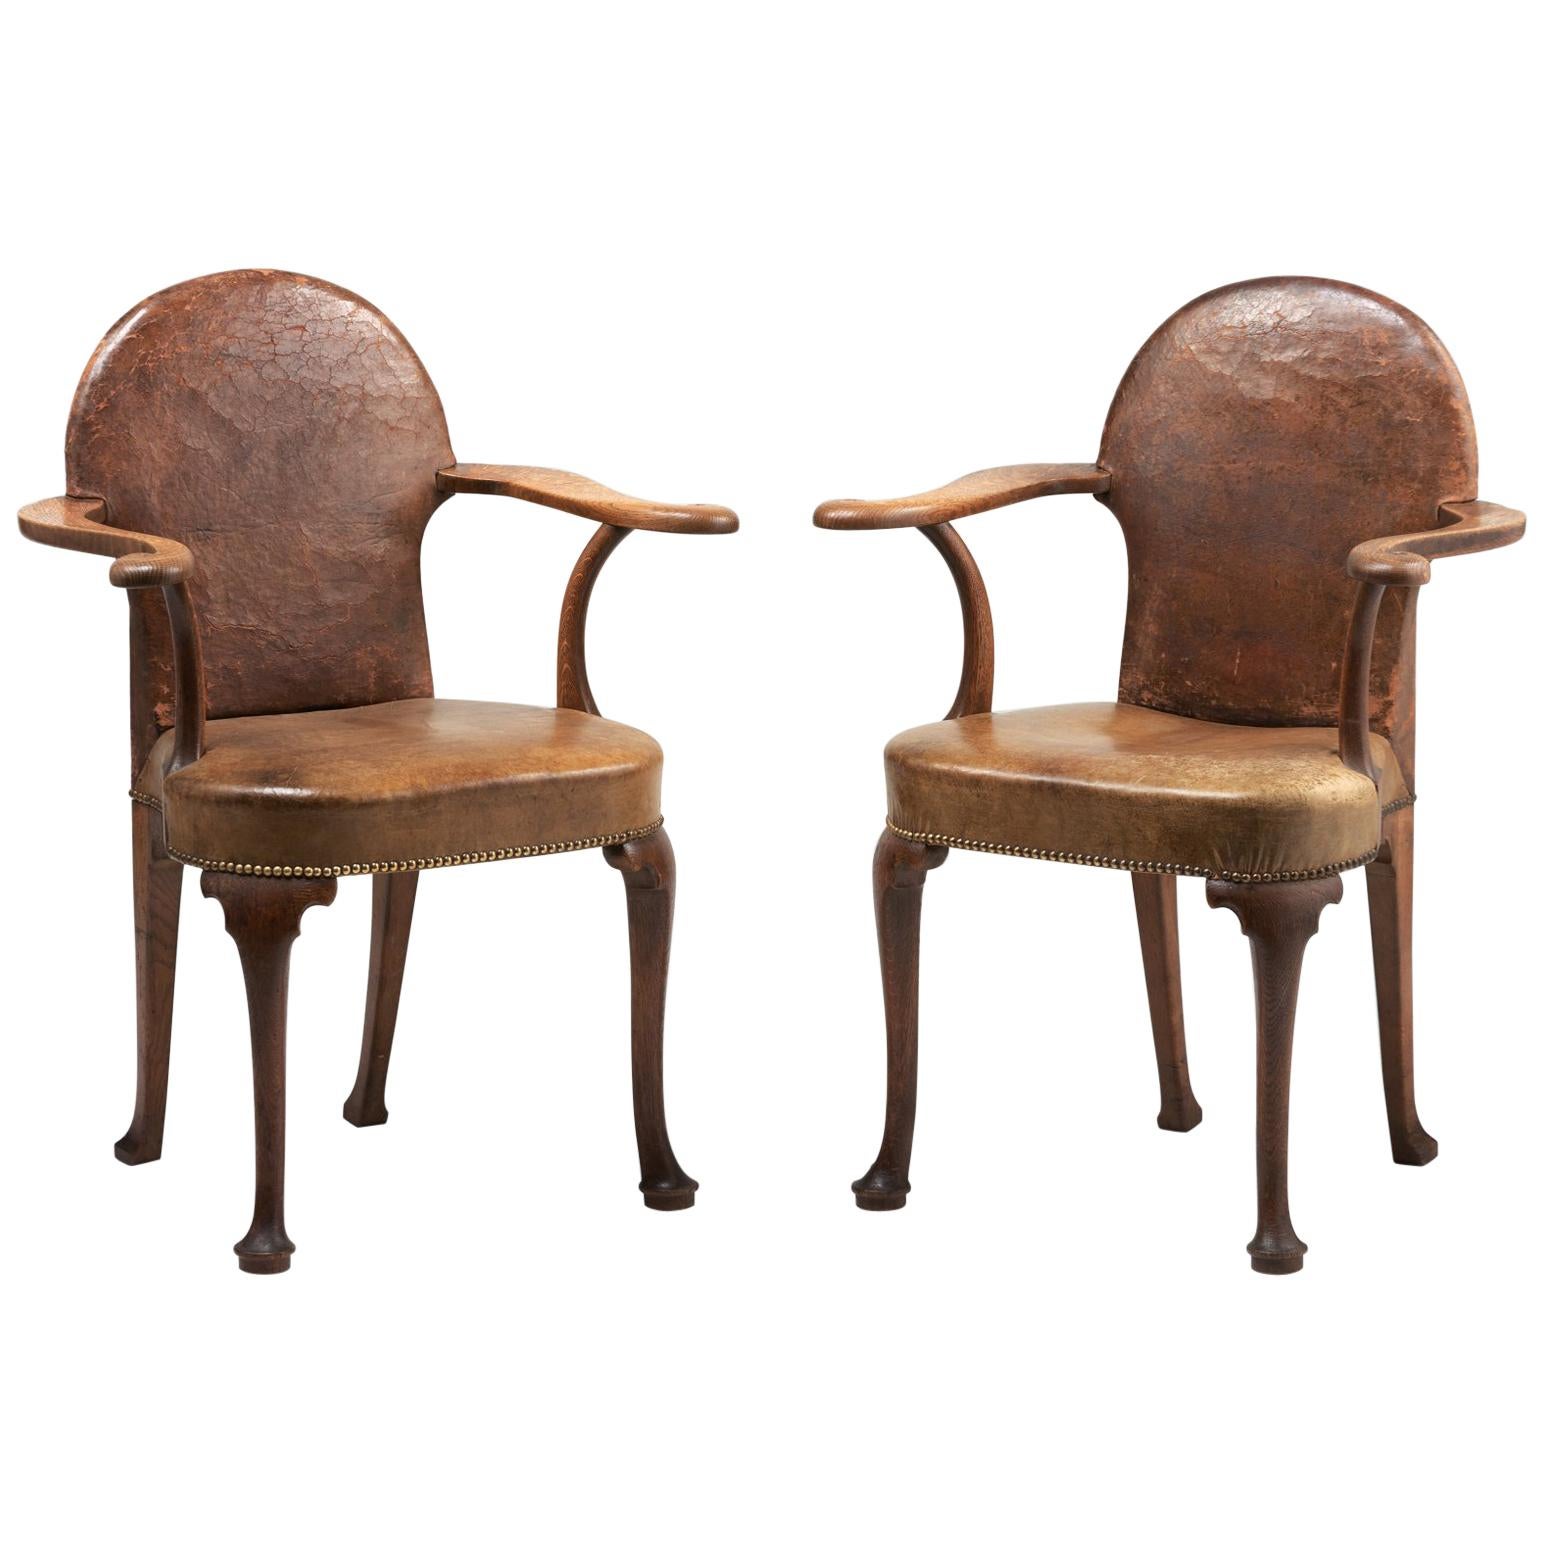 Pair of Edwardian Oak and Leather Armchairs, England, circa 1900